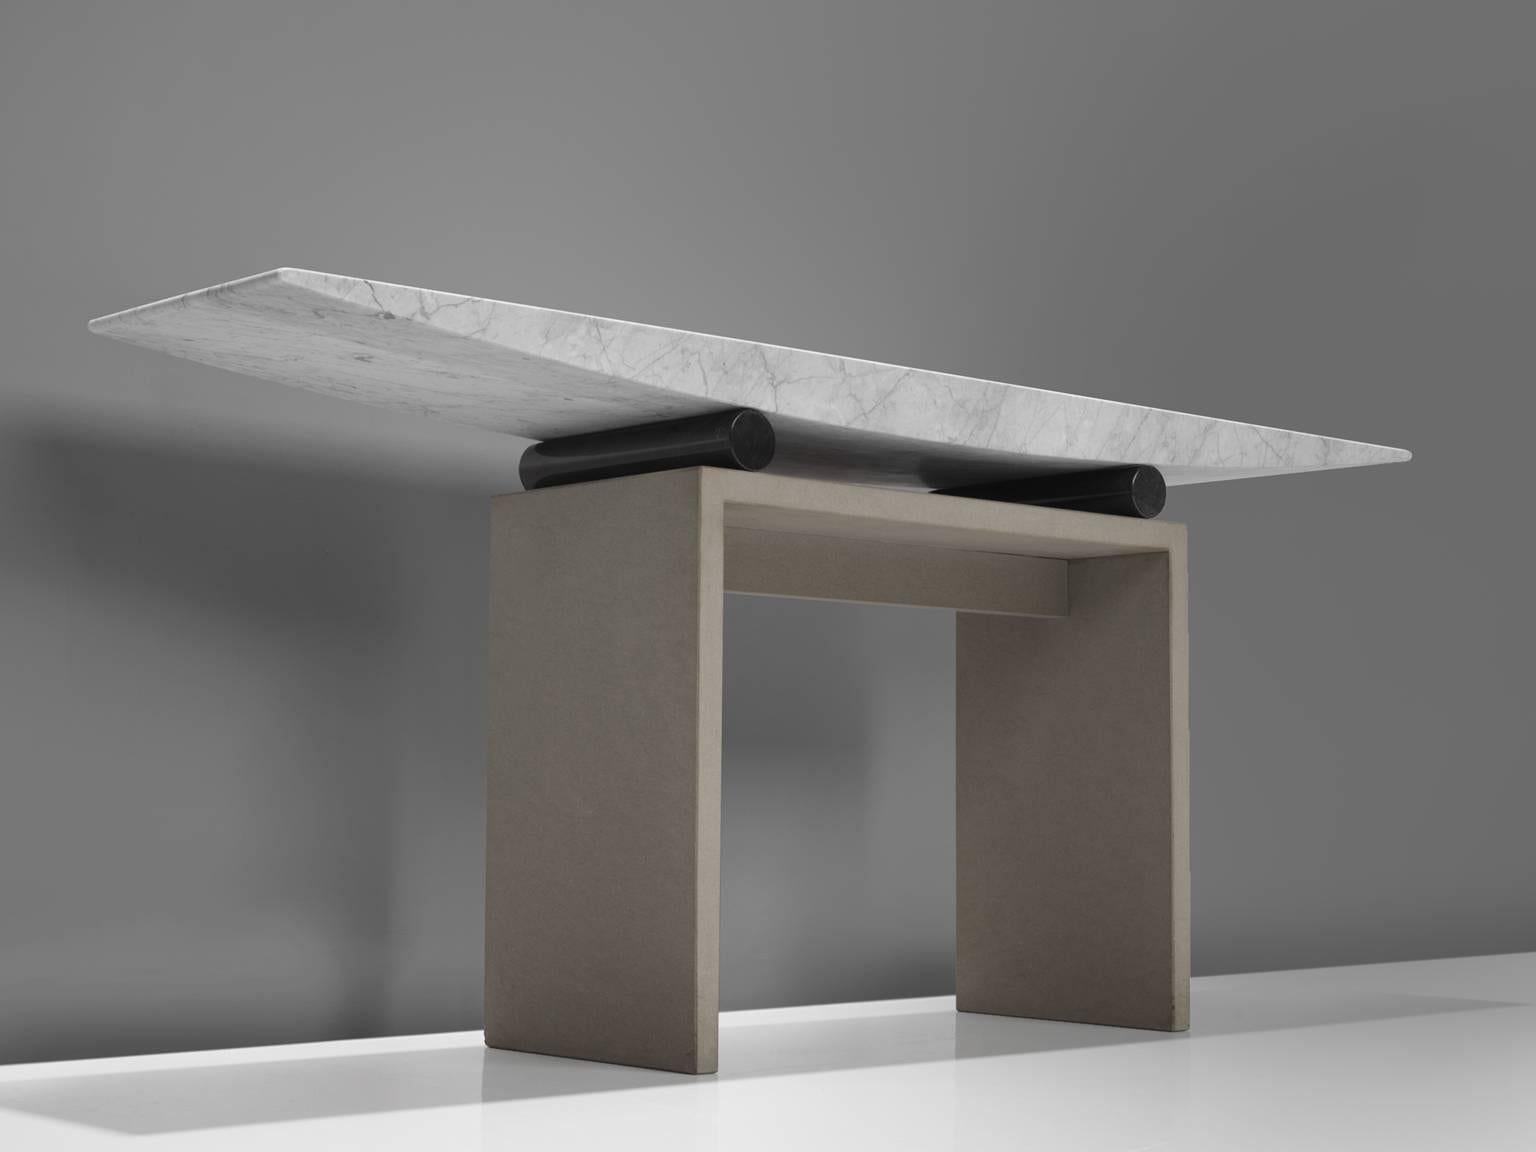 Danilo Silvestrin, console table 'Amanta II', marble, stone, Italy, 1980.

This console table 'Consolle Amanta II' shows a wonderful combination of architectural shapes. The table holds various contrasting shapes and materials such as stone versus